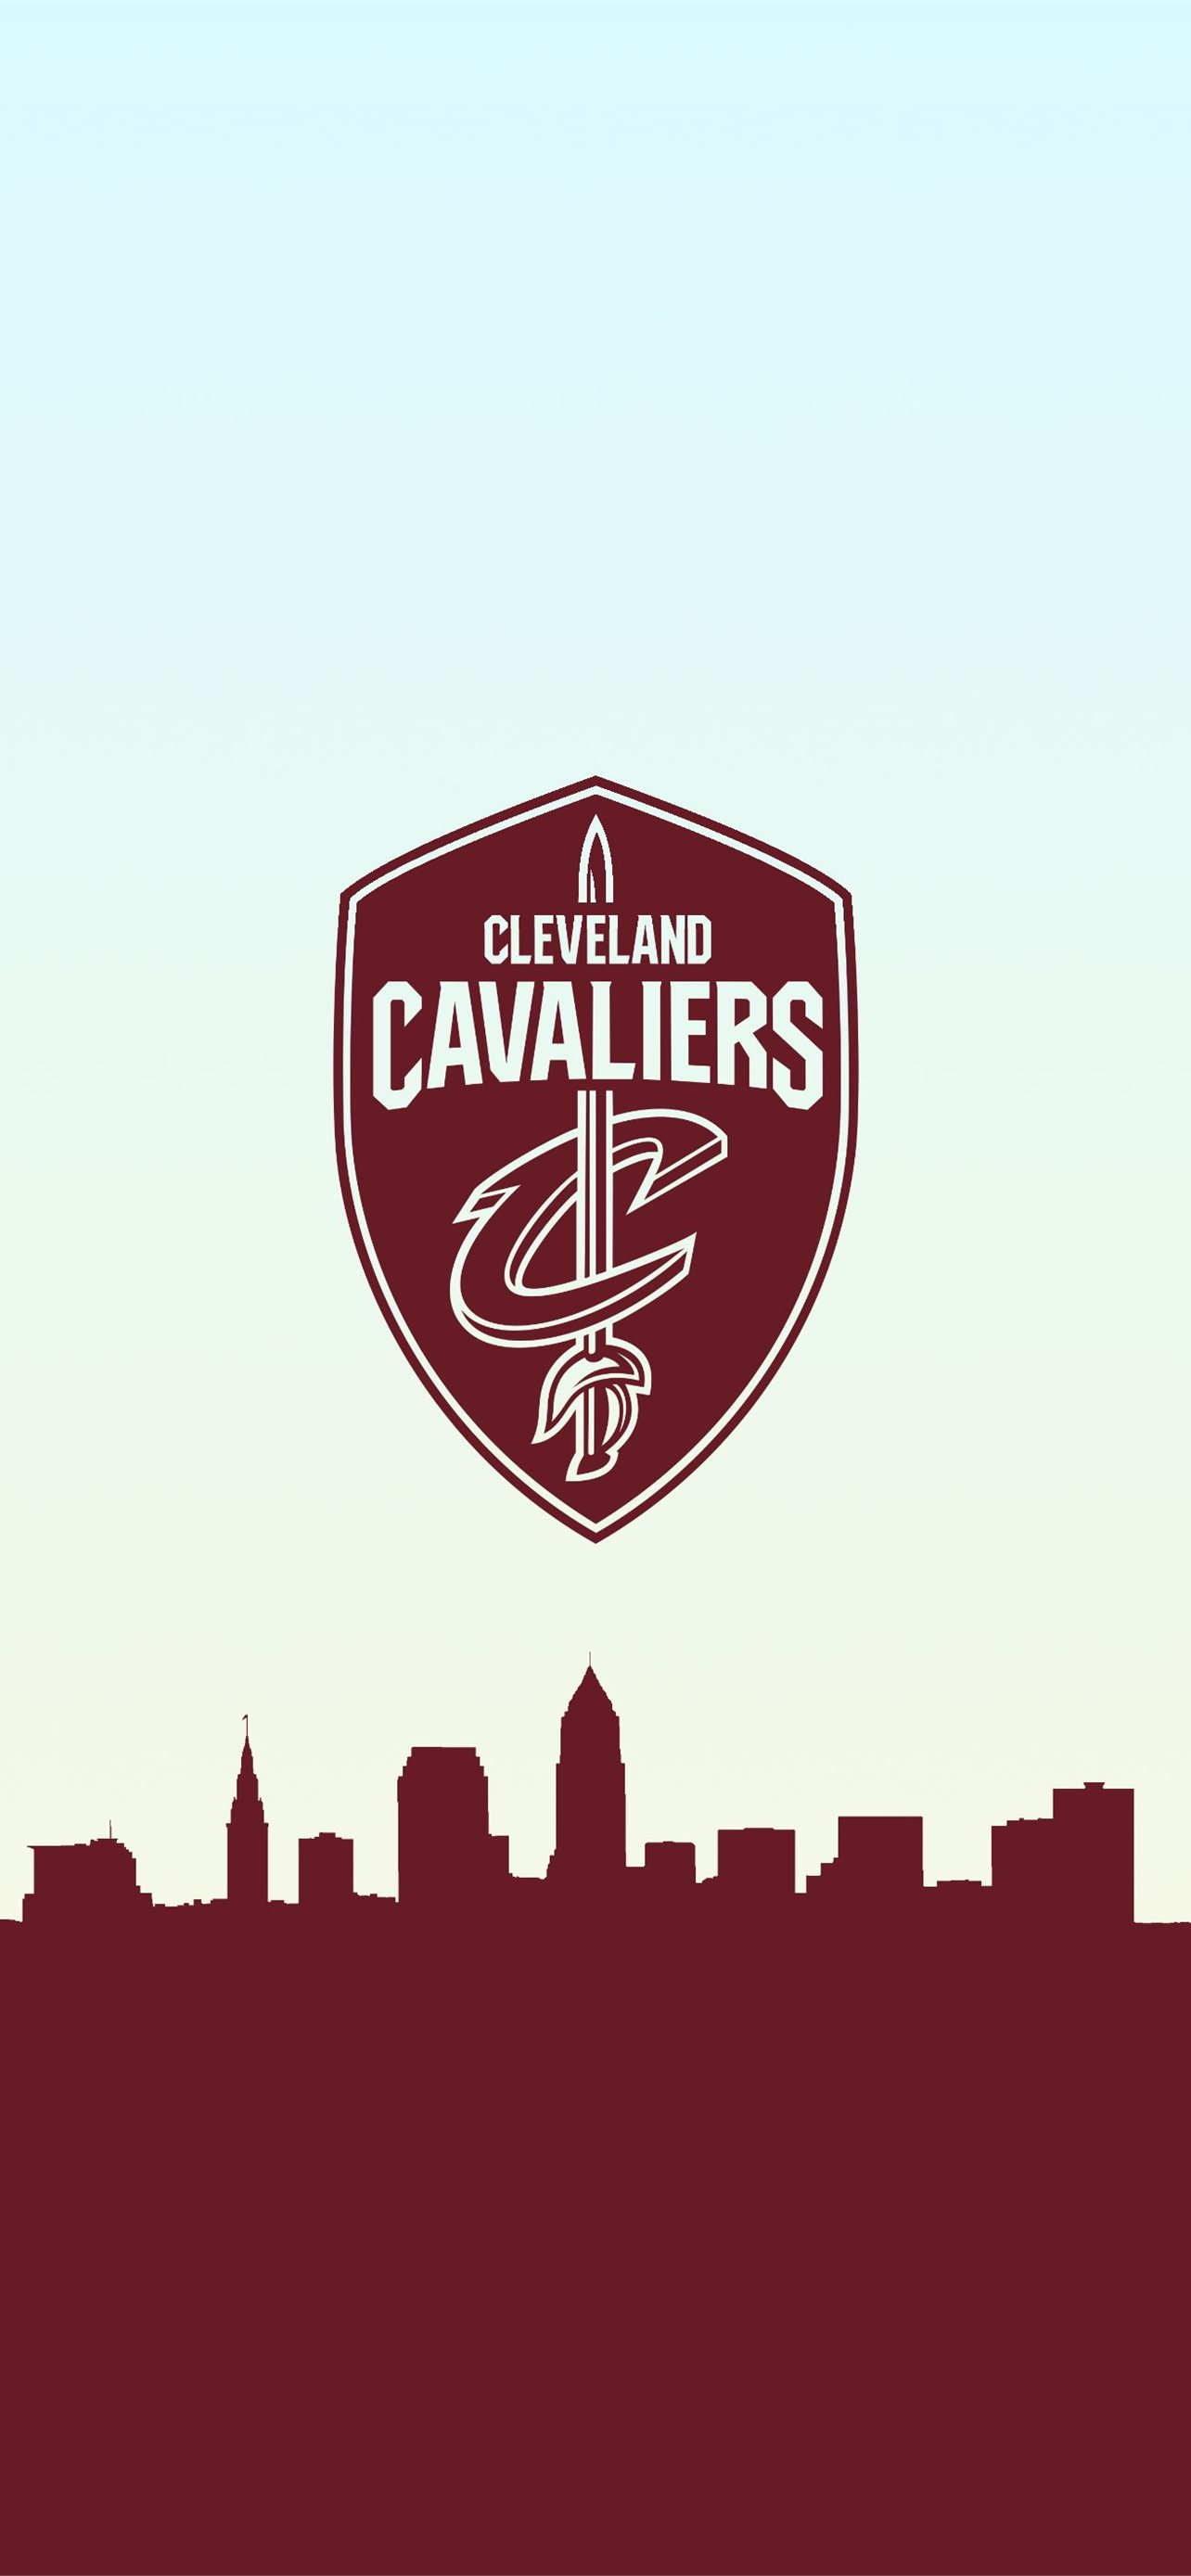 Share more than 69 cavaliers wallpaper in.cdgdbentre